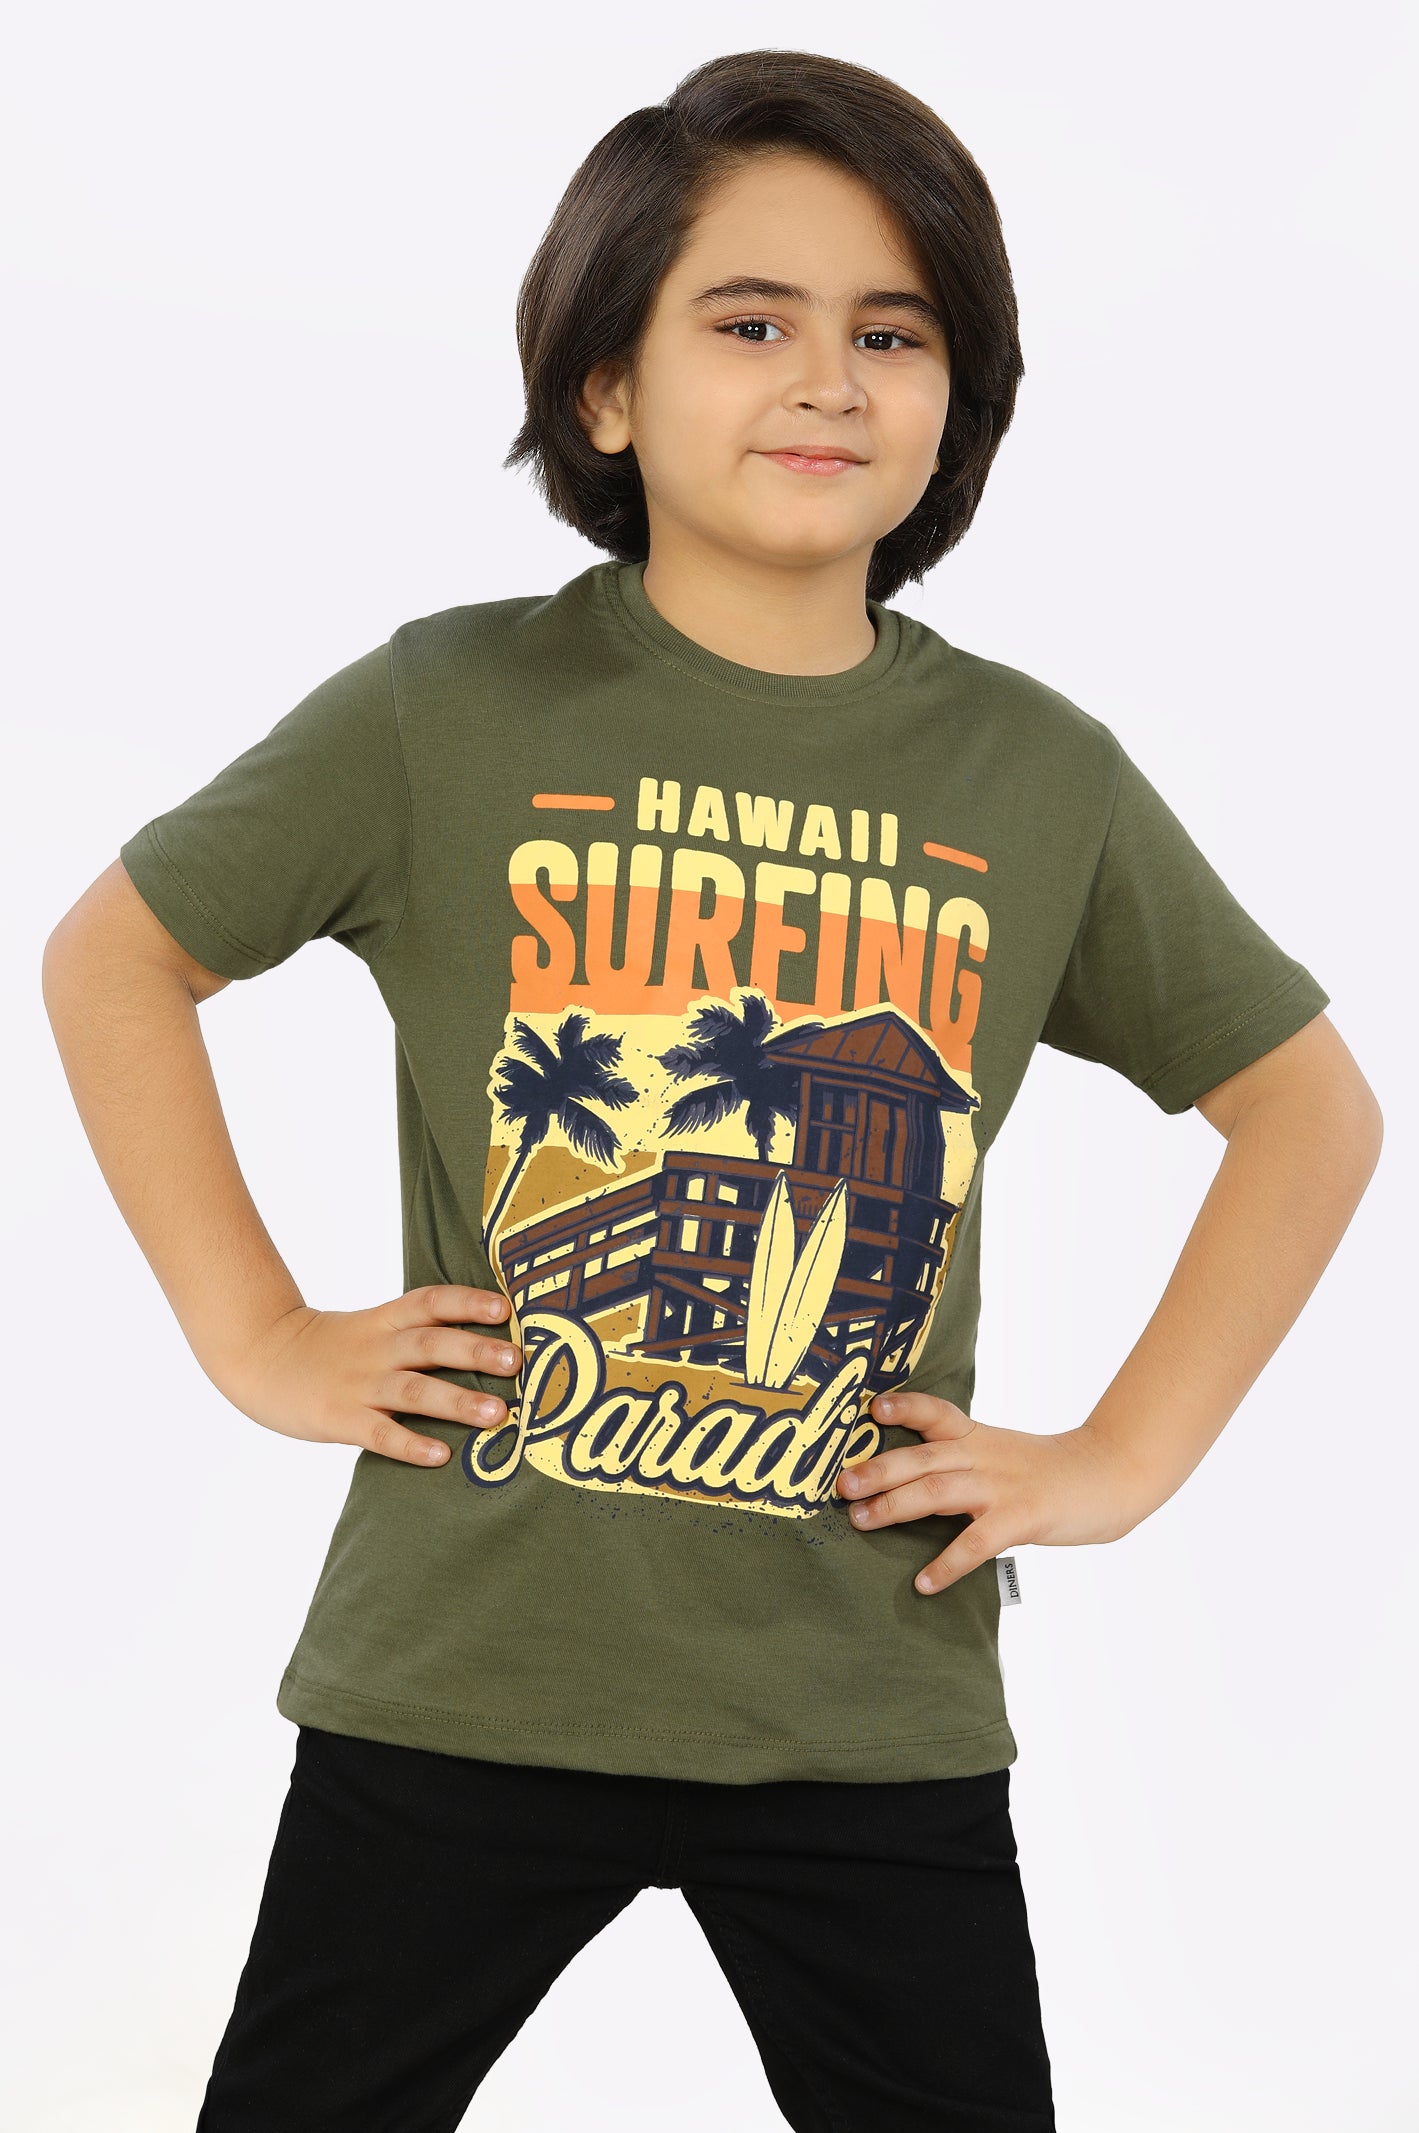 Surfing Print T-Shirt From Diners